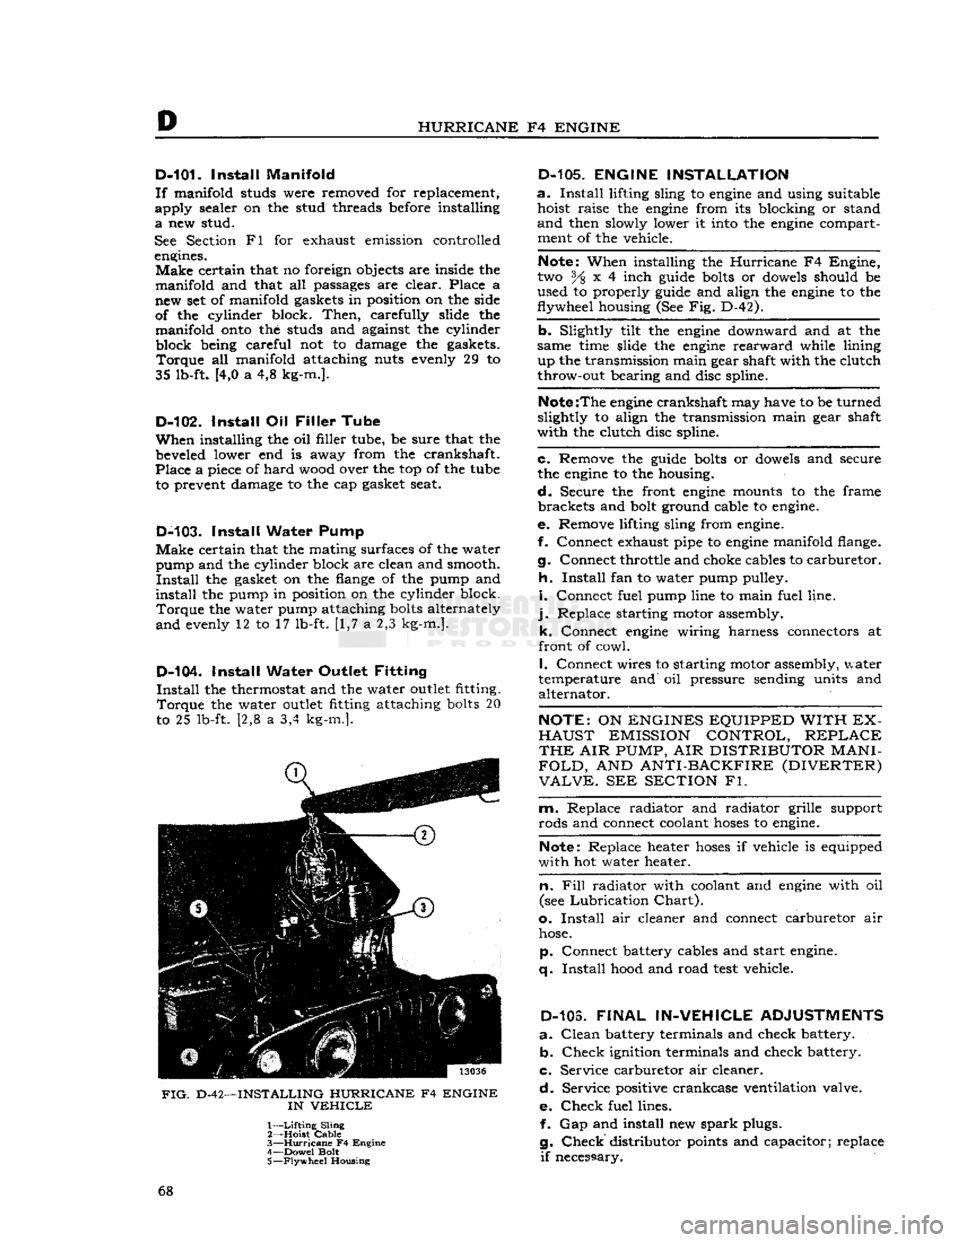 JEEP DJ 1953  Service Manual 
D 
HURRICANE
 F4
 ENGINE 
D-101.
 Install
 Manifold 

If
 manifold studs were removed for replacement, 
apply sealer on the stud threads
 before
 installing 
 a
 new stud. 
See Section Fl for exhaust